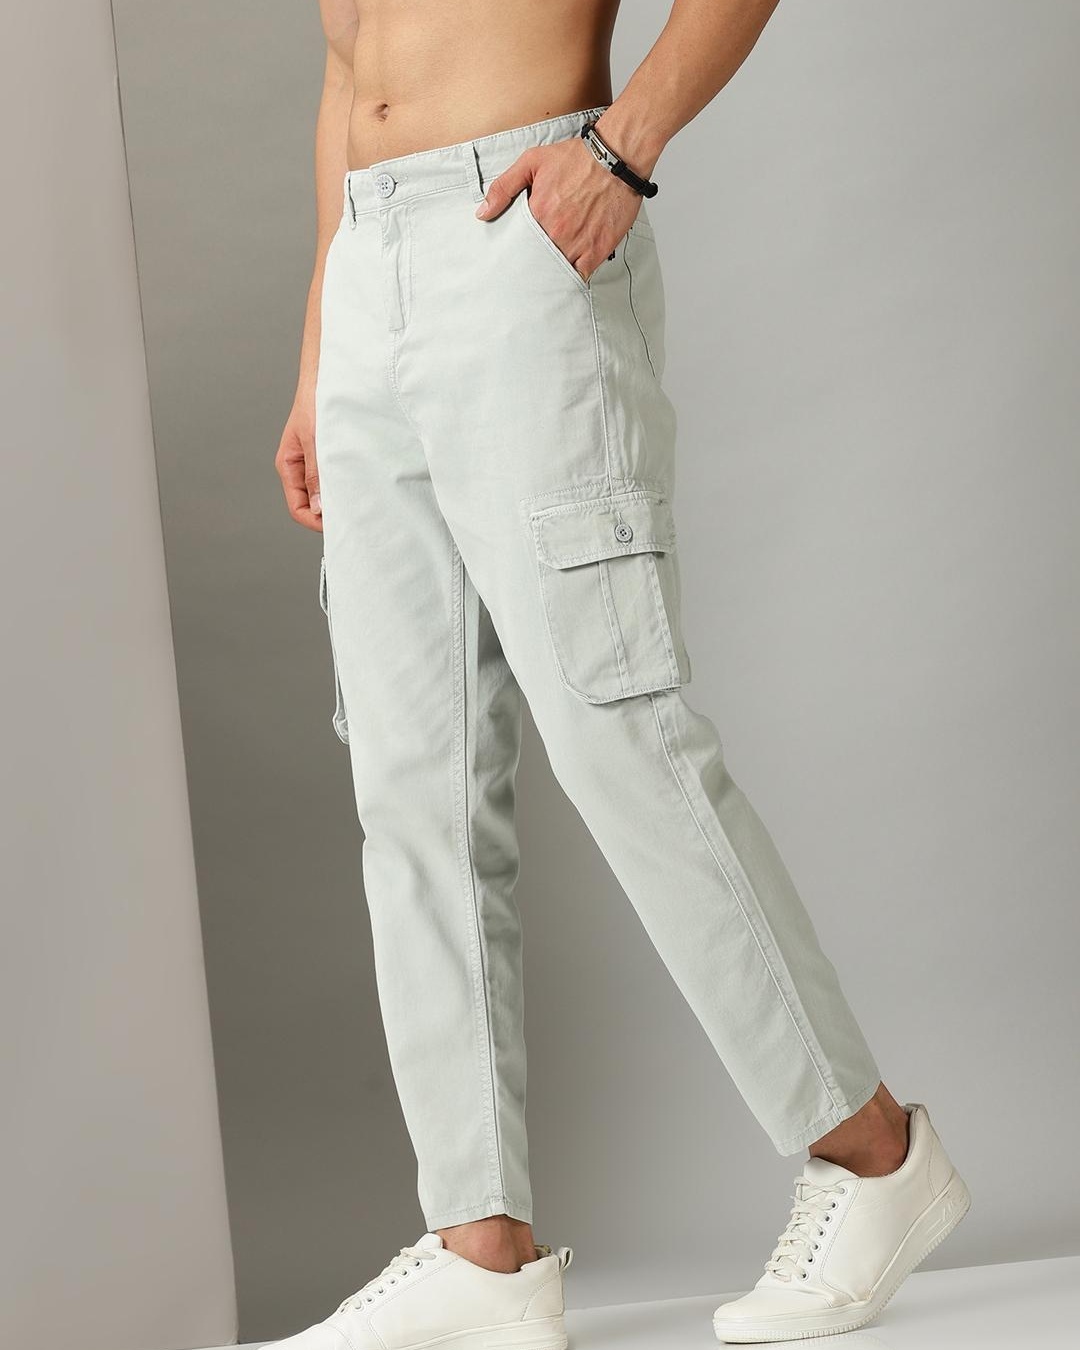 Relaxed Fit Cargo Pants - Light gray - Men